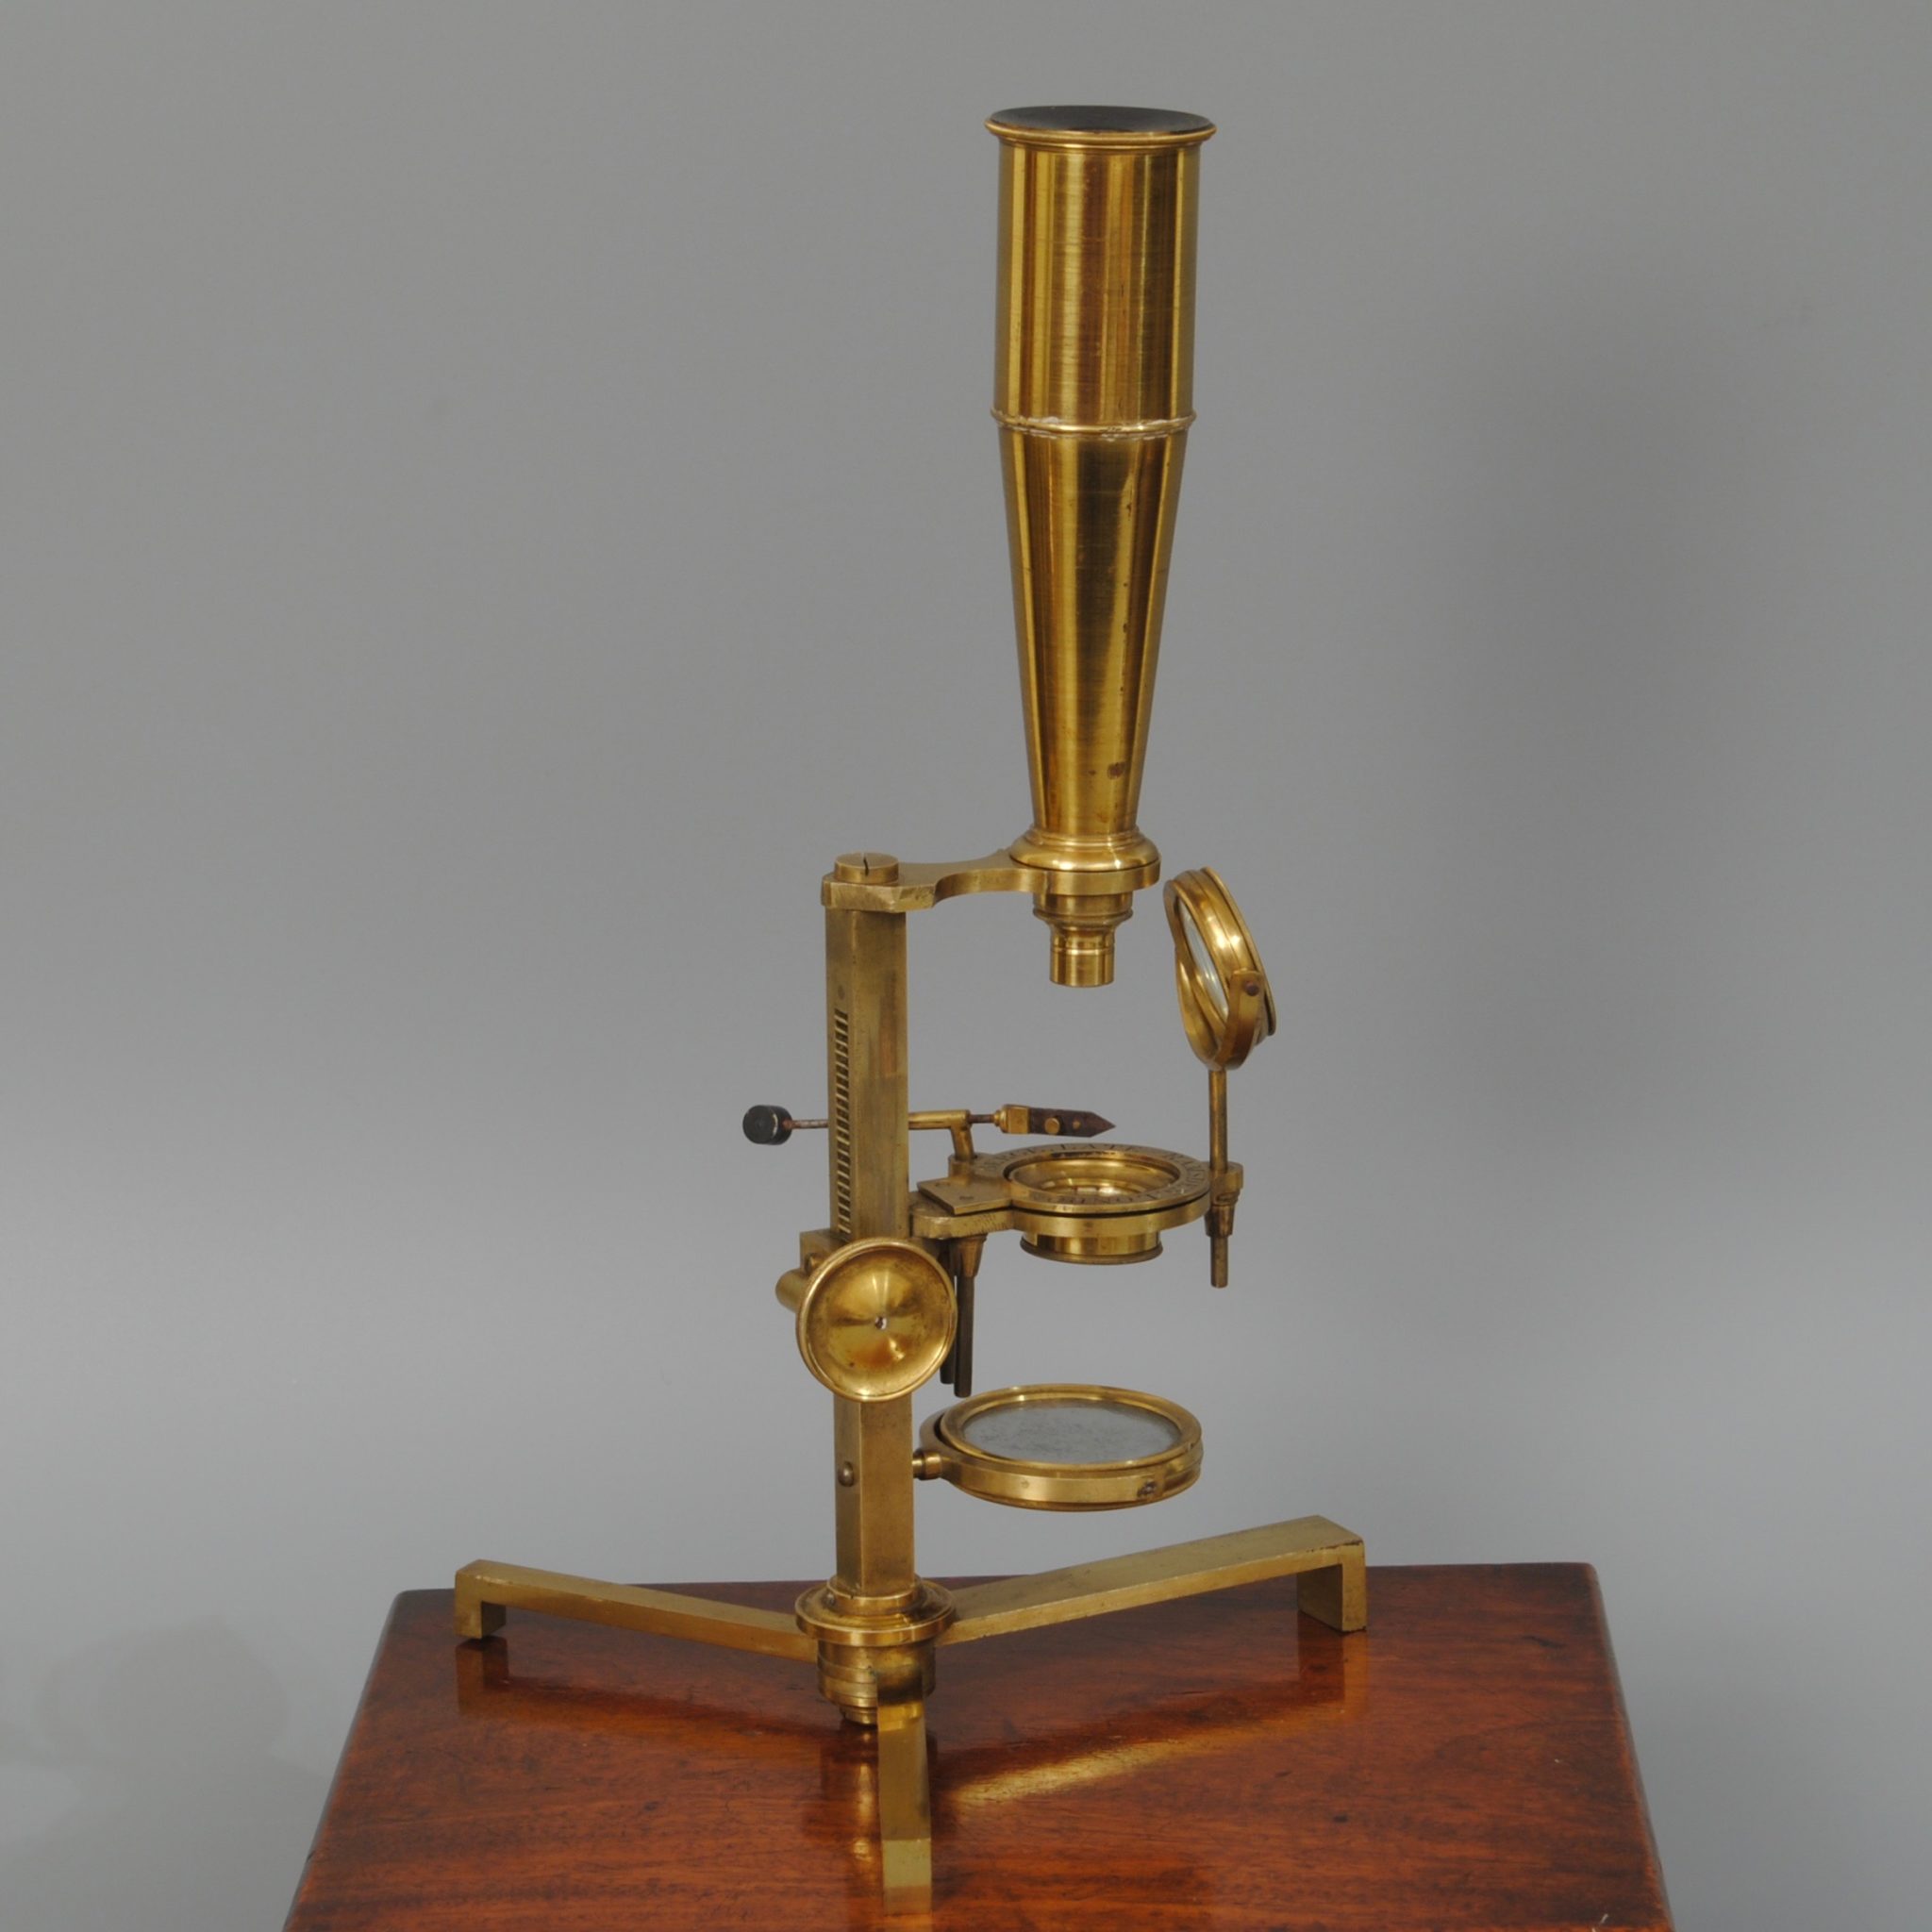 A Berge late Ramsden compound microscope